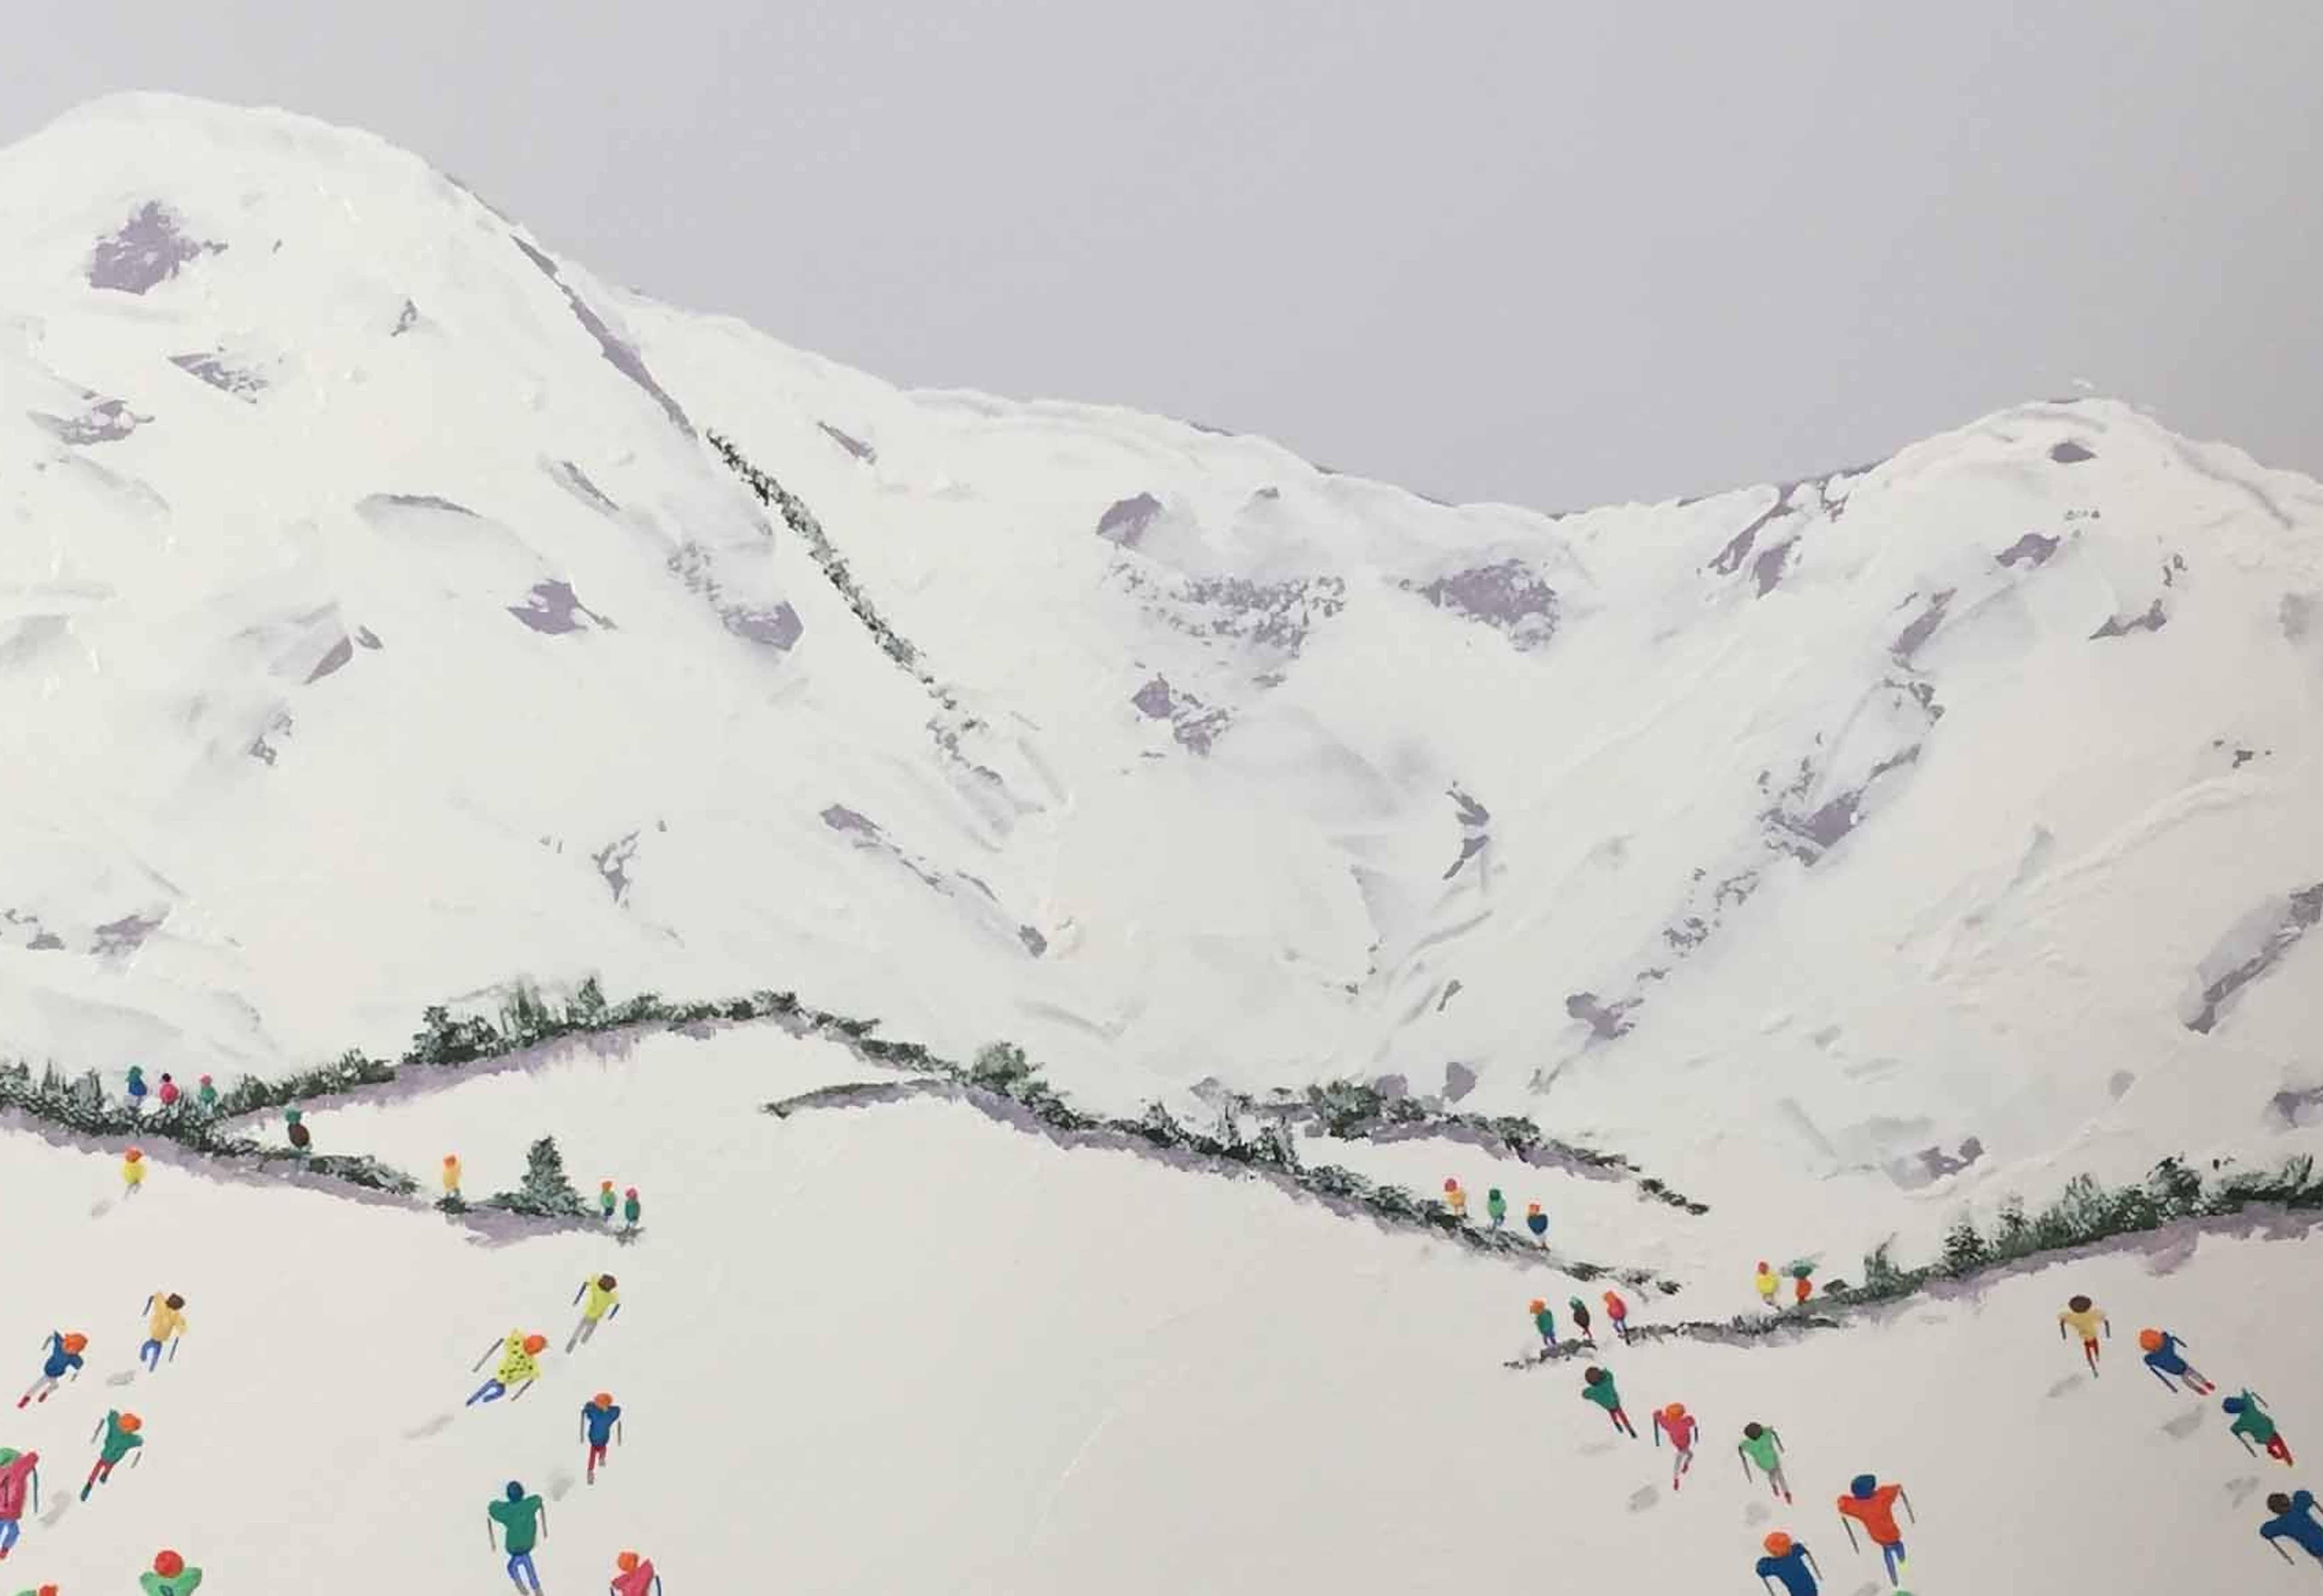 'Ski School' is a fun and vibrant piece that just pops off the wall. It is extraordinarily unconventional and sure to inspire conversation. 'Ski School' is part of a series of works inspired by skiing holidays. The full series can be viewed at our